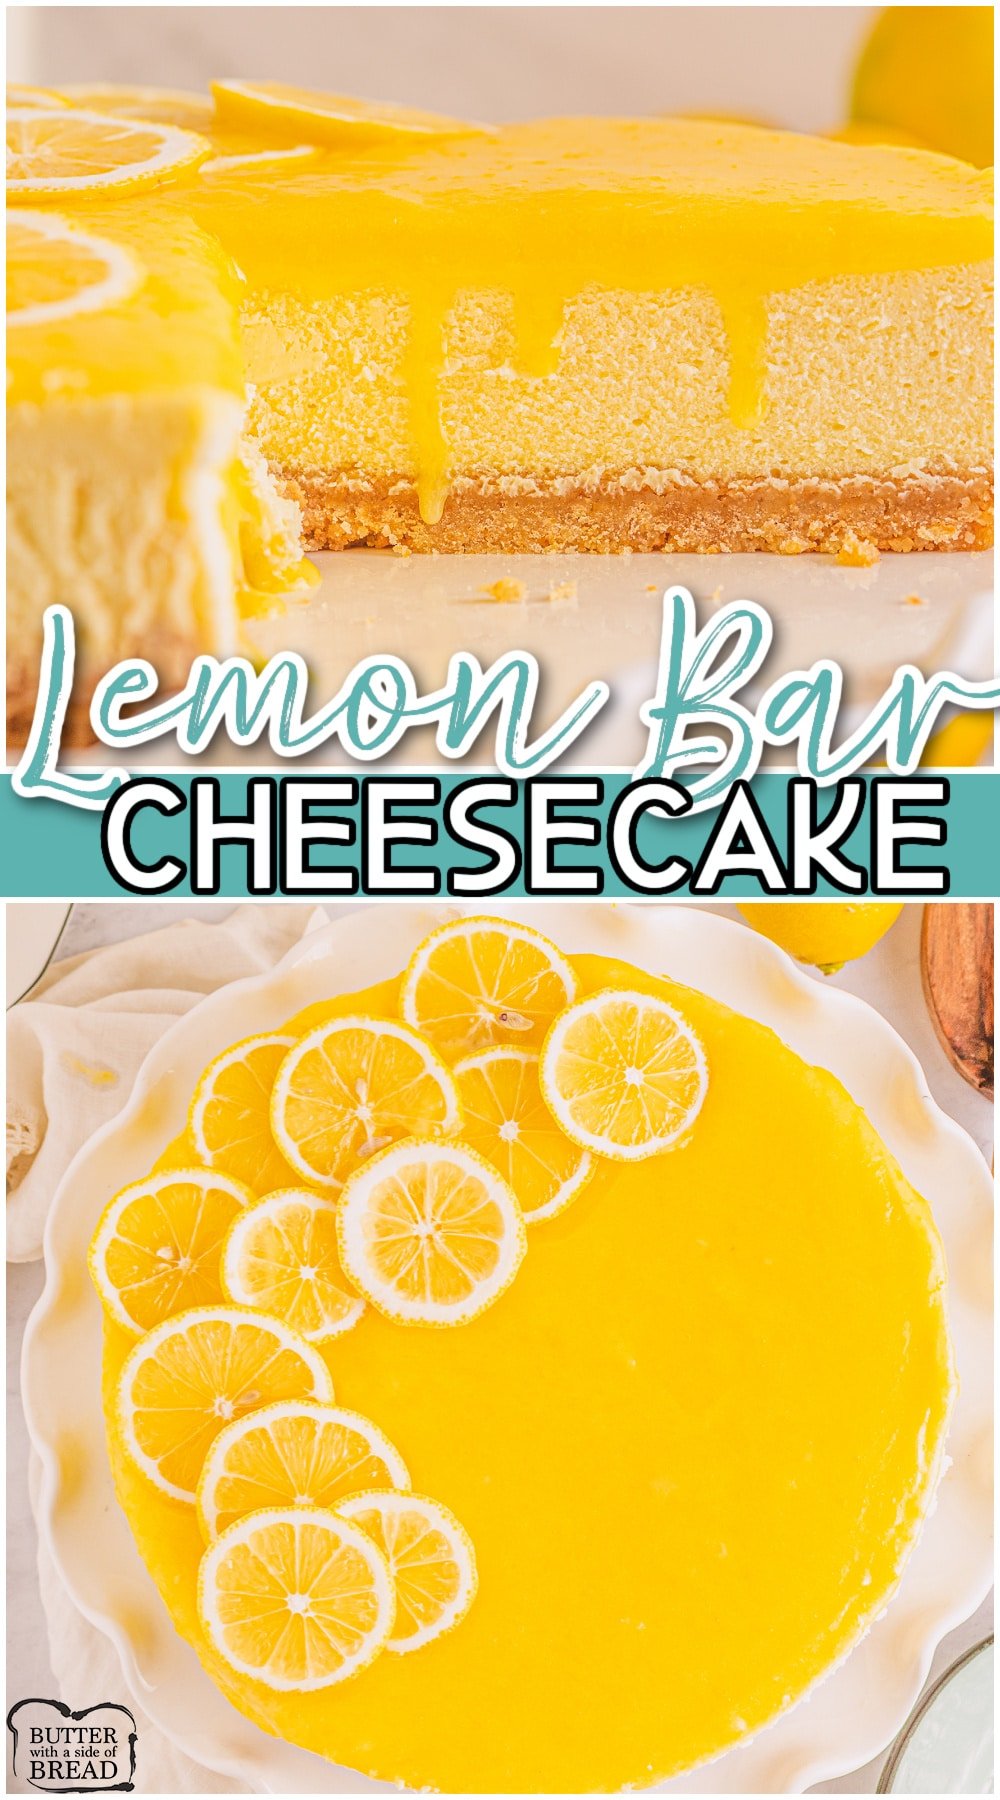 Lemon Bar Cheesecake is an incredible blend of 2 desserts, lemon cheesecake & lemon bars! Smooth, creamy cheesecake topped with a tangy, buttery lemon curd that everyone goes crazy over! 